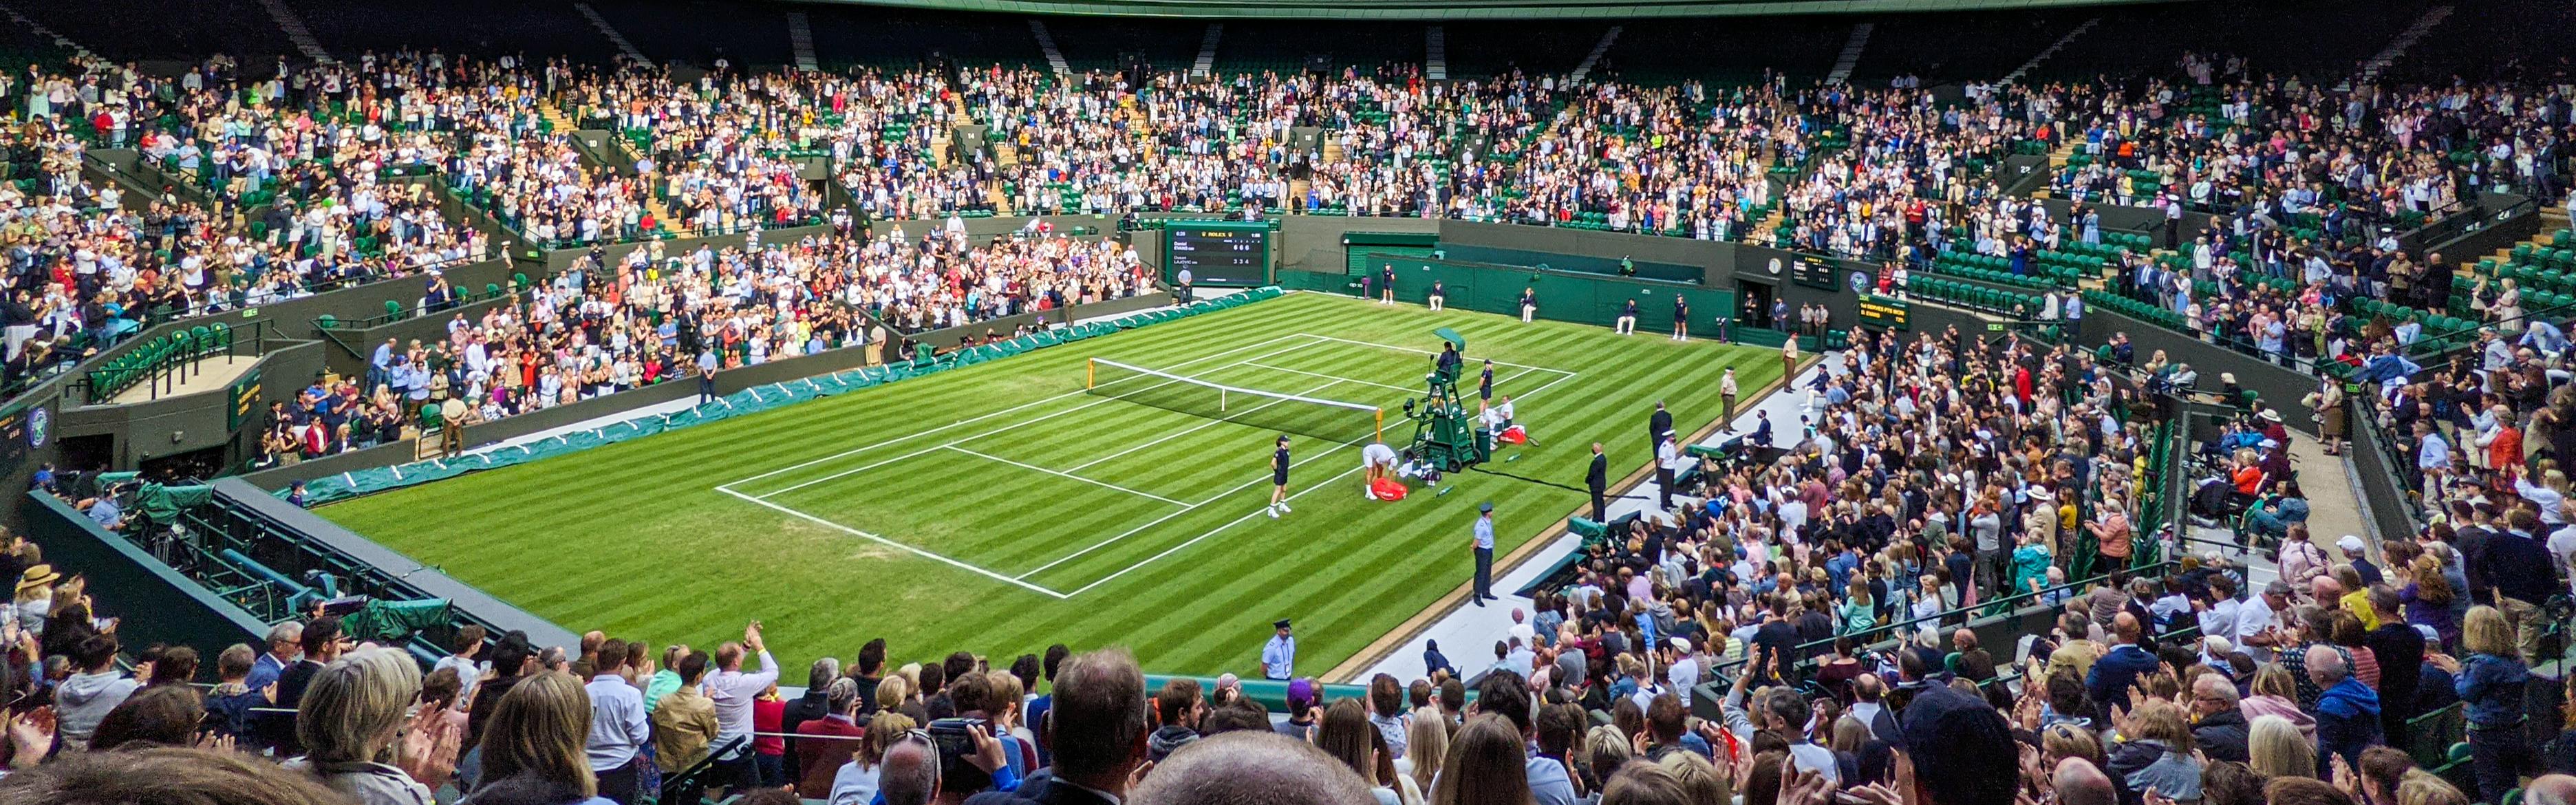 An image of the court and its surrounding crowds at Wimbledon.